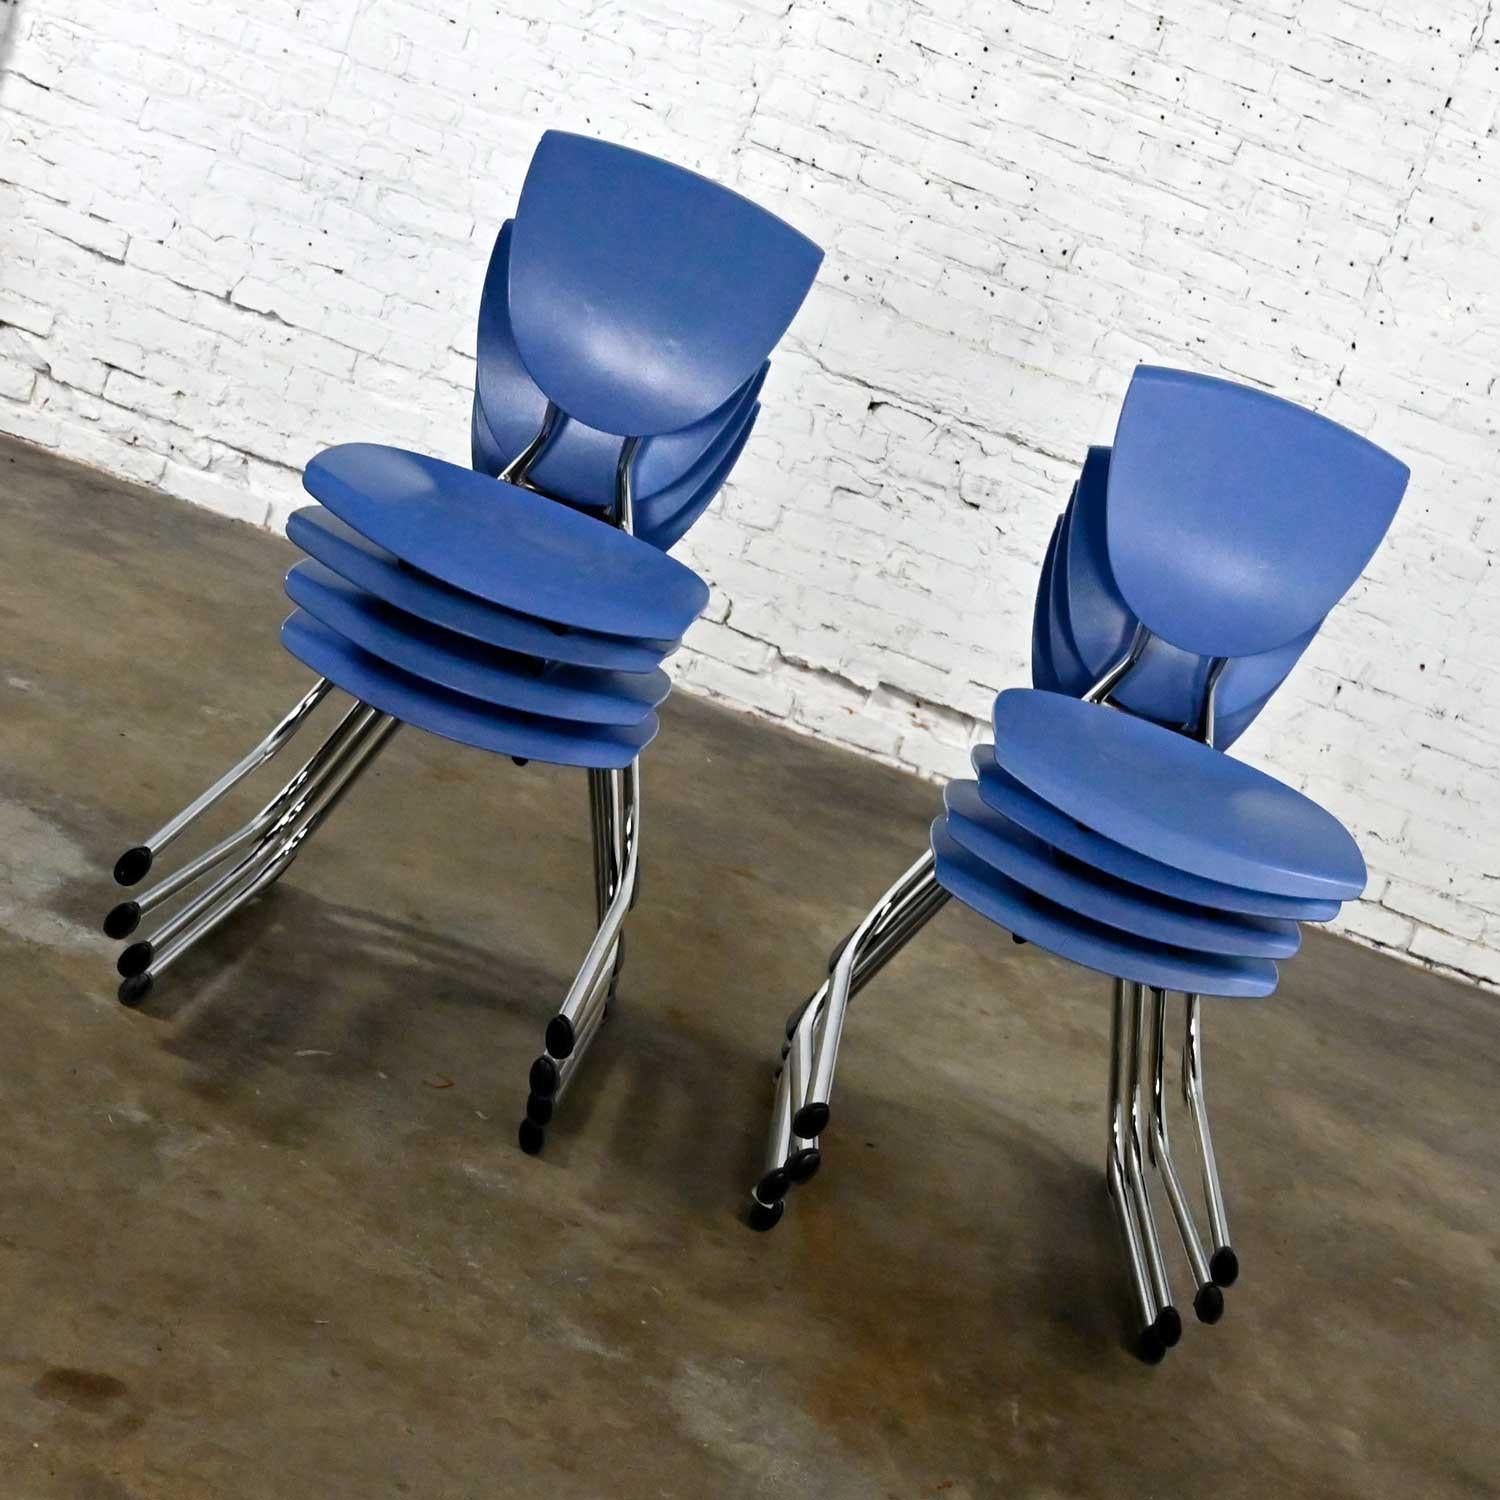 Fabulous vintage modern light blue plastic & chrome reverse cantilever Intellect dining chairs by Krueger International (a.k.a.) KI Seating - 8 total. Beautiful condition, keeping in mind that these are vintage and not new so will have signs of use